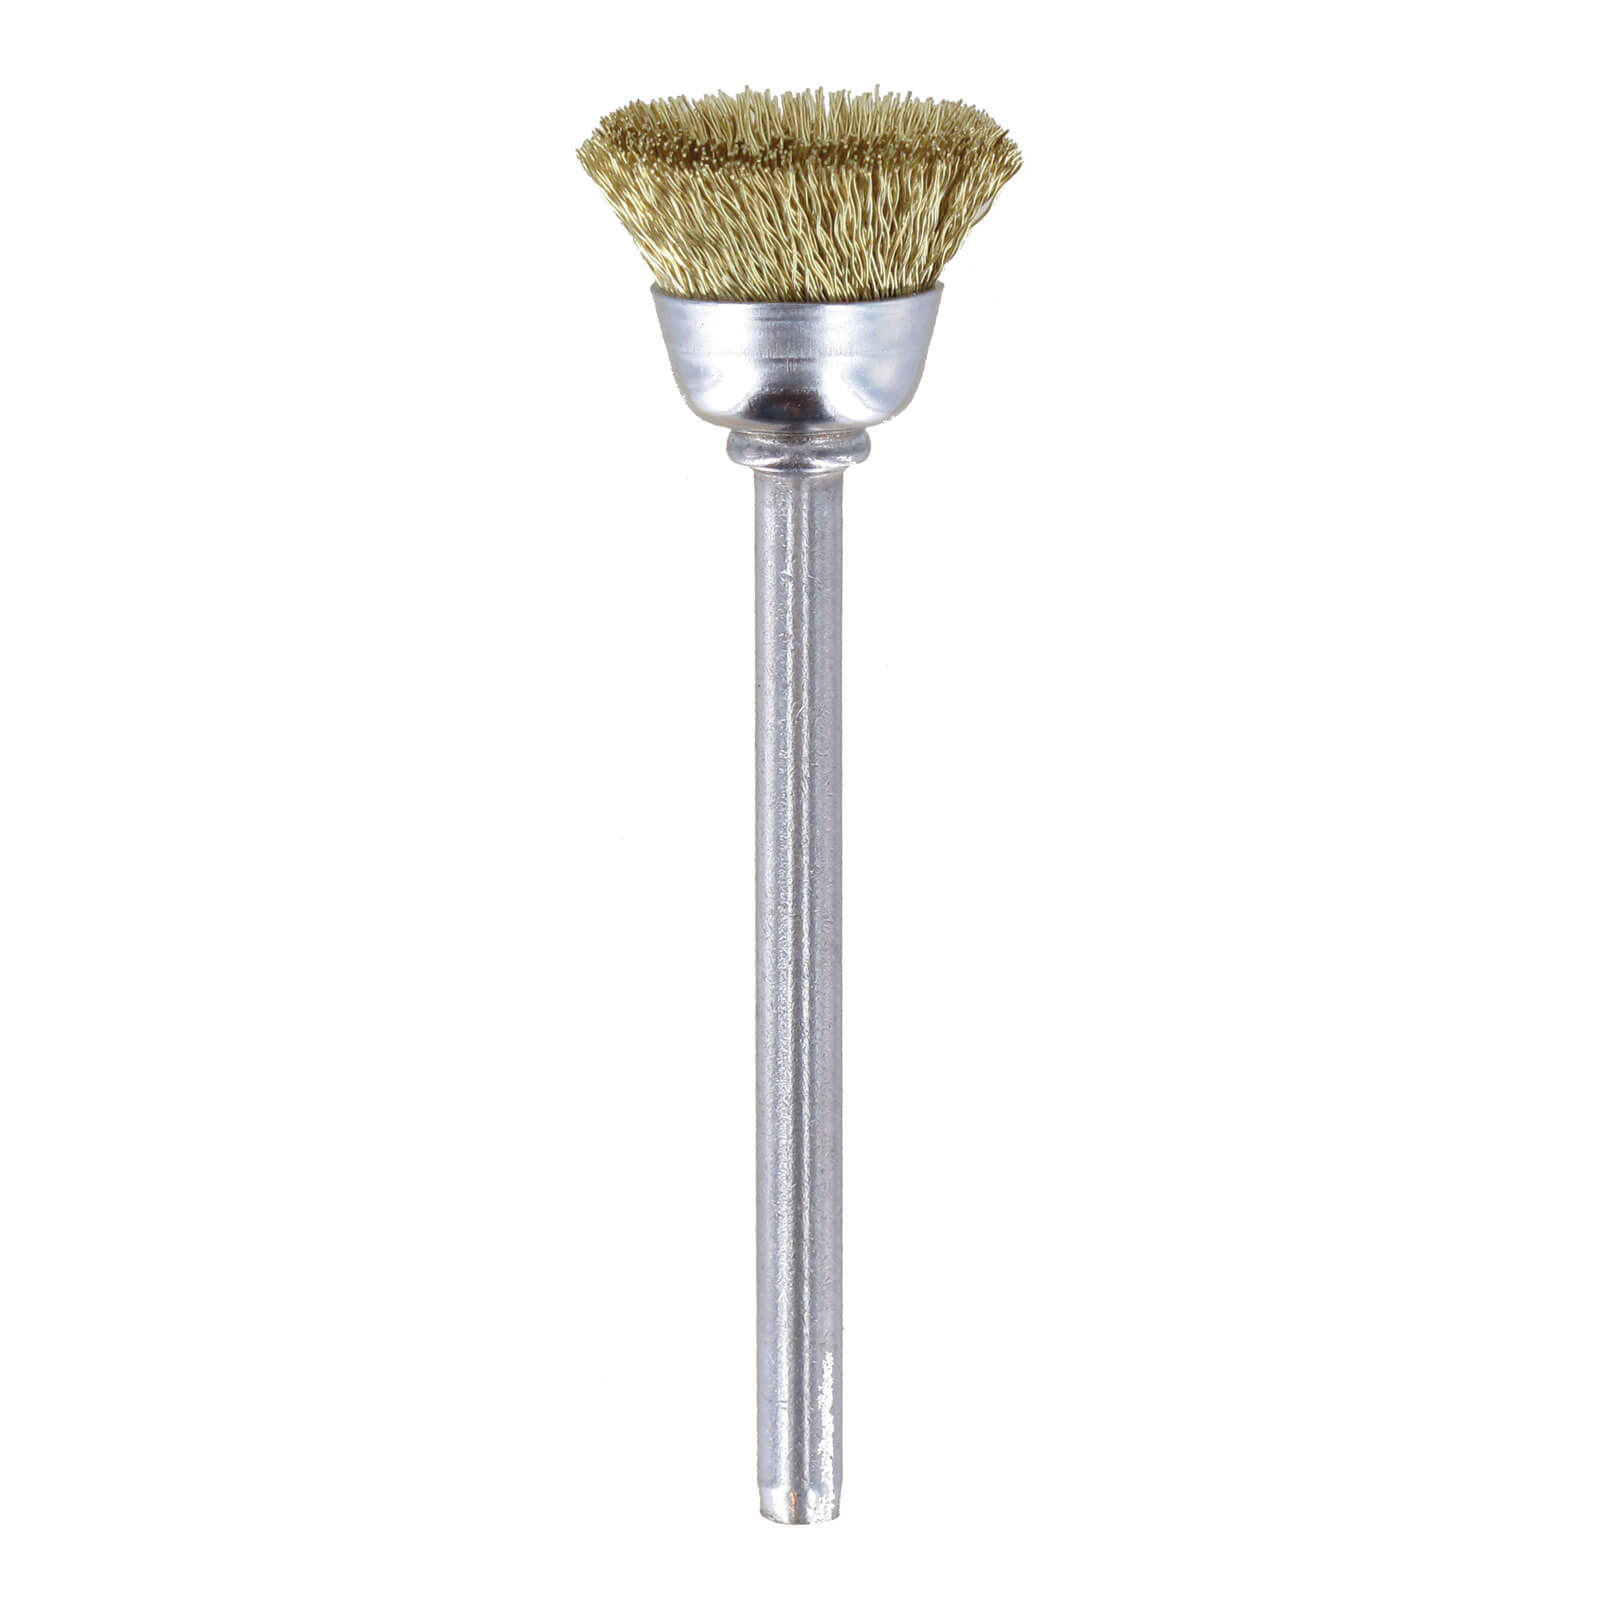 Image of Dremel 536 Brass Wire Cup Brush 13mm Pack of 2